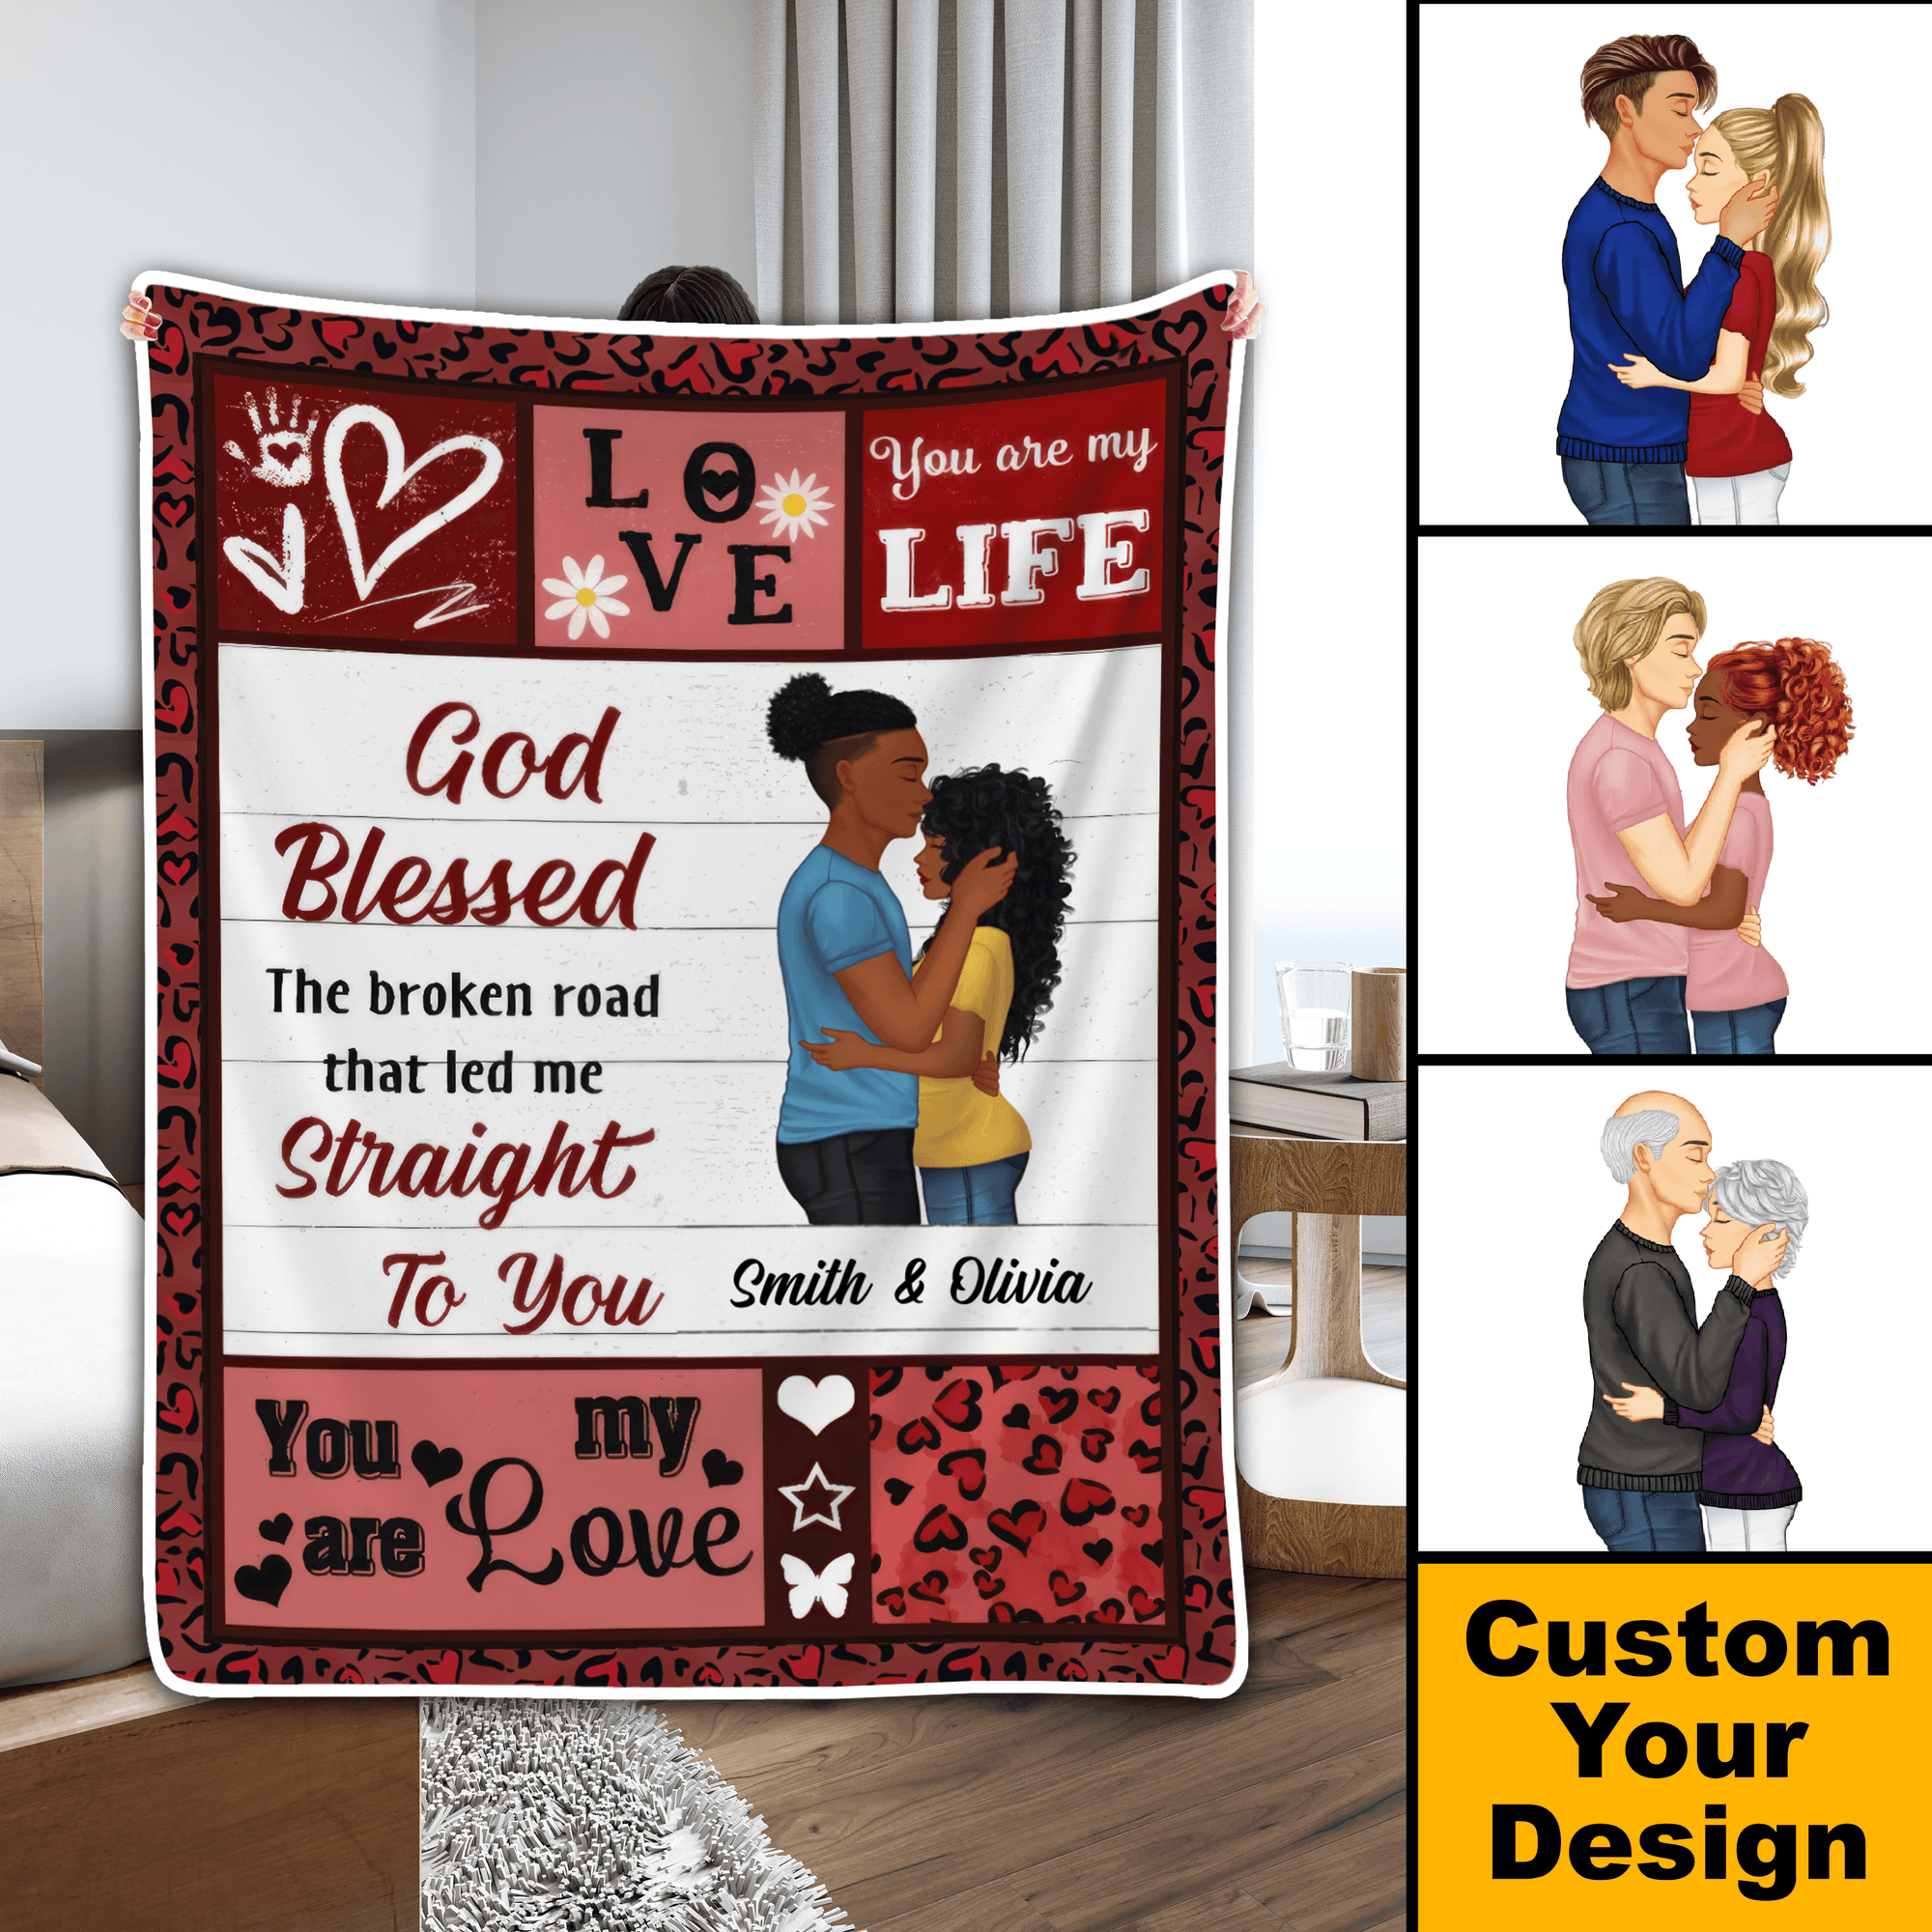 God Blessed - Personalized Custom Blanket - Family, Couple Valentine's Day Gift For Her/Him, Husband, Wife, Boyfriend, Girlfriend, Daughter, Son, Best Friends